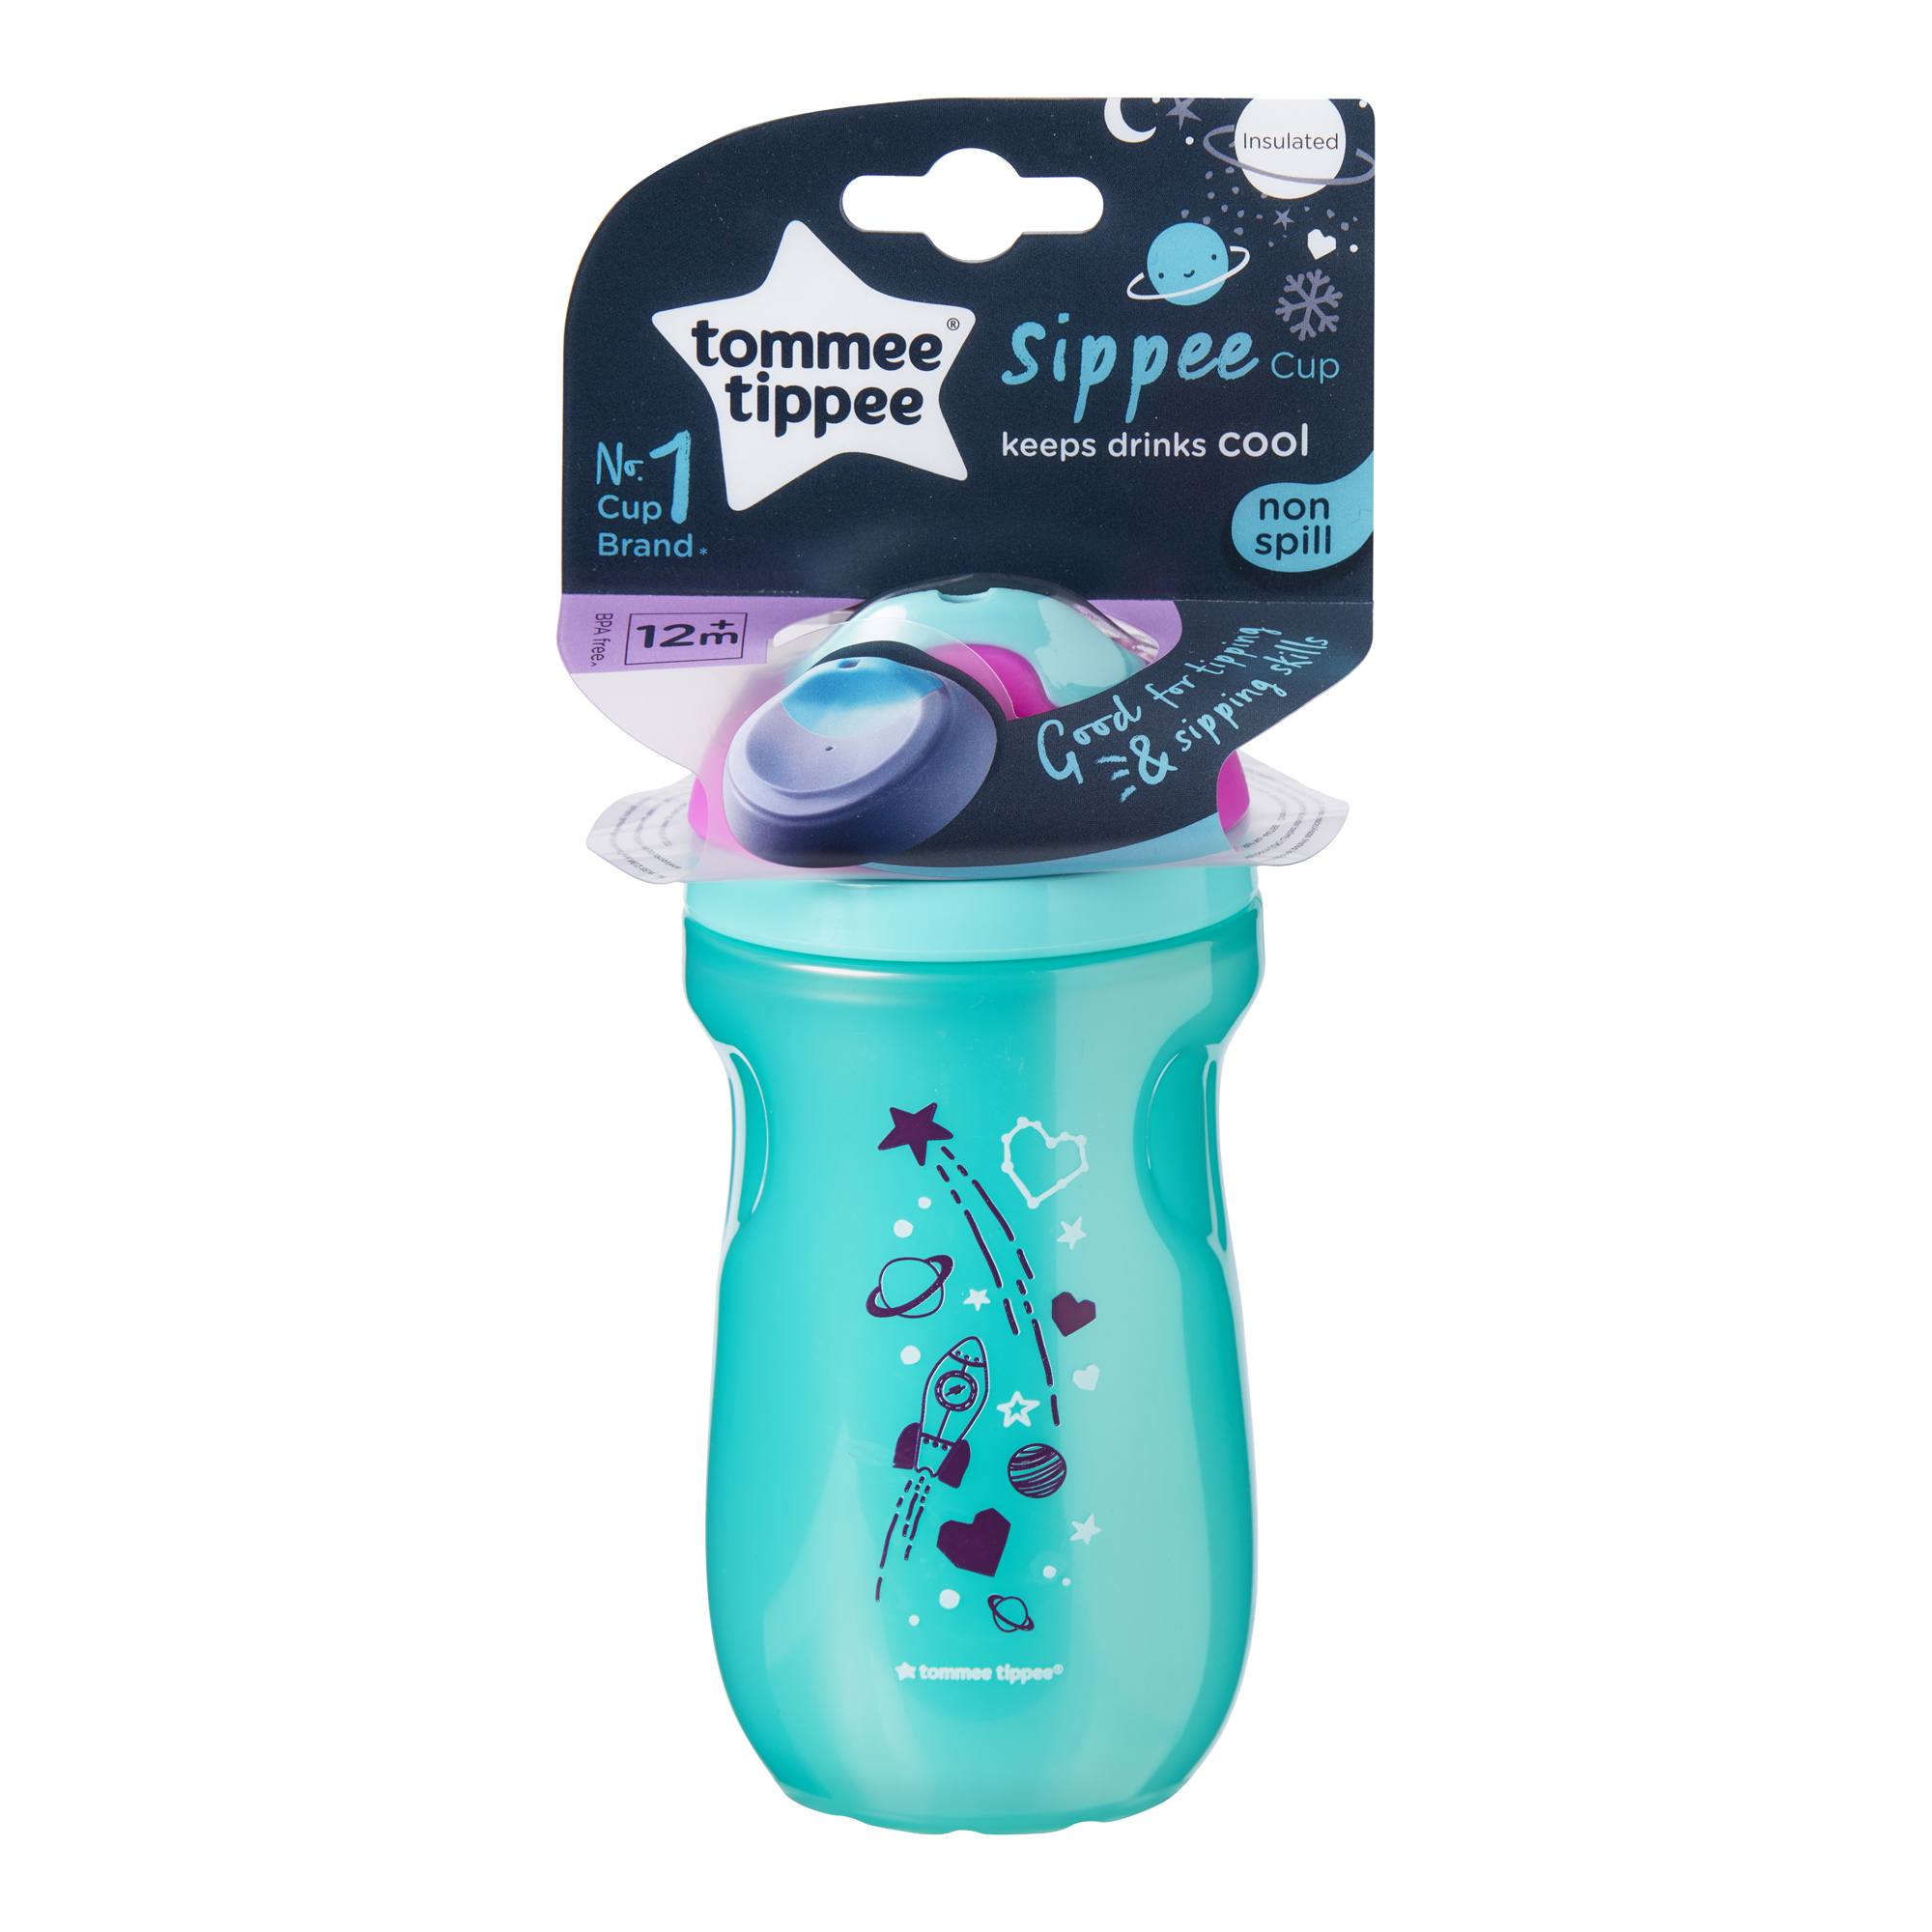 Cana Sippee Izoterma, ONL  Tommee Tippee, 260 ml x 1 buc, 12luni+,  Turquoise image 1